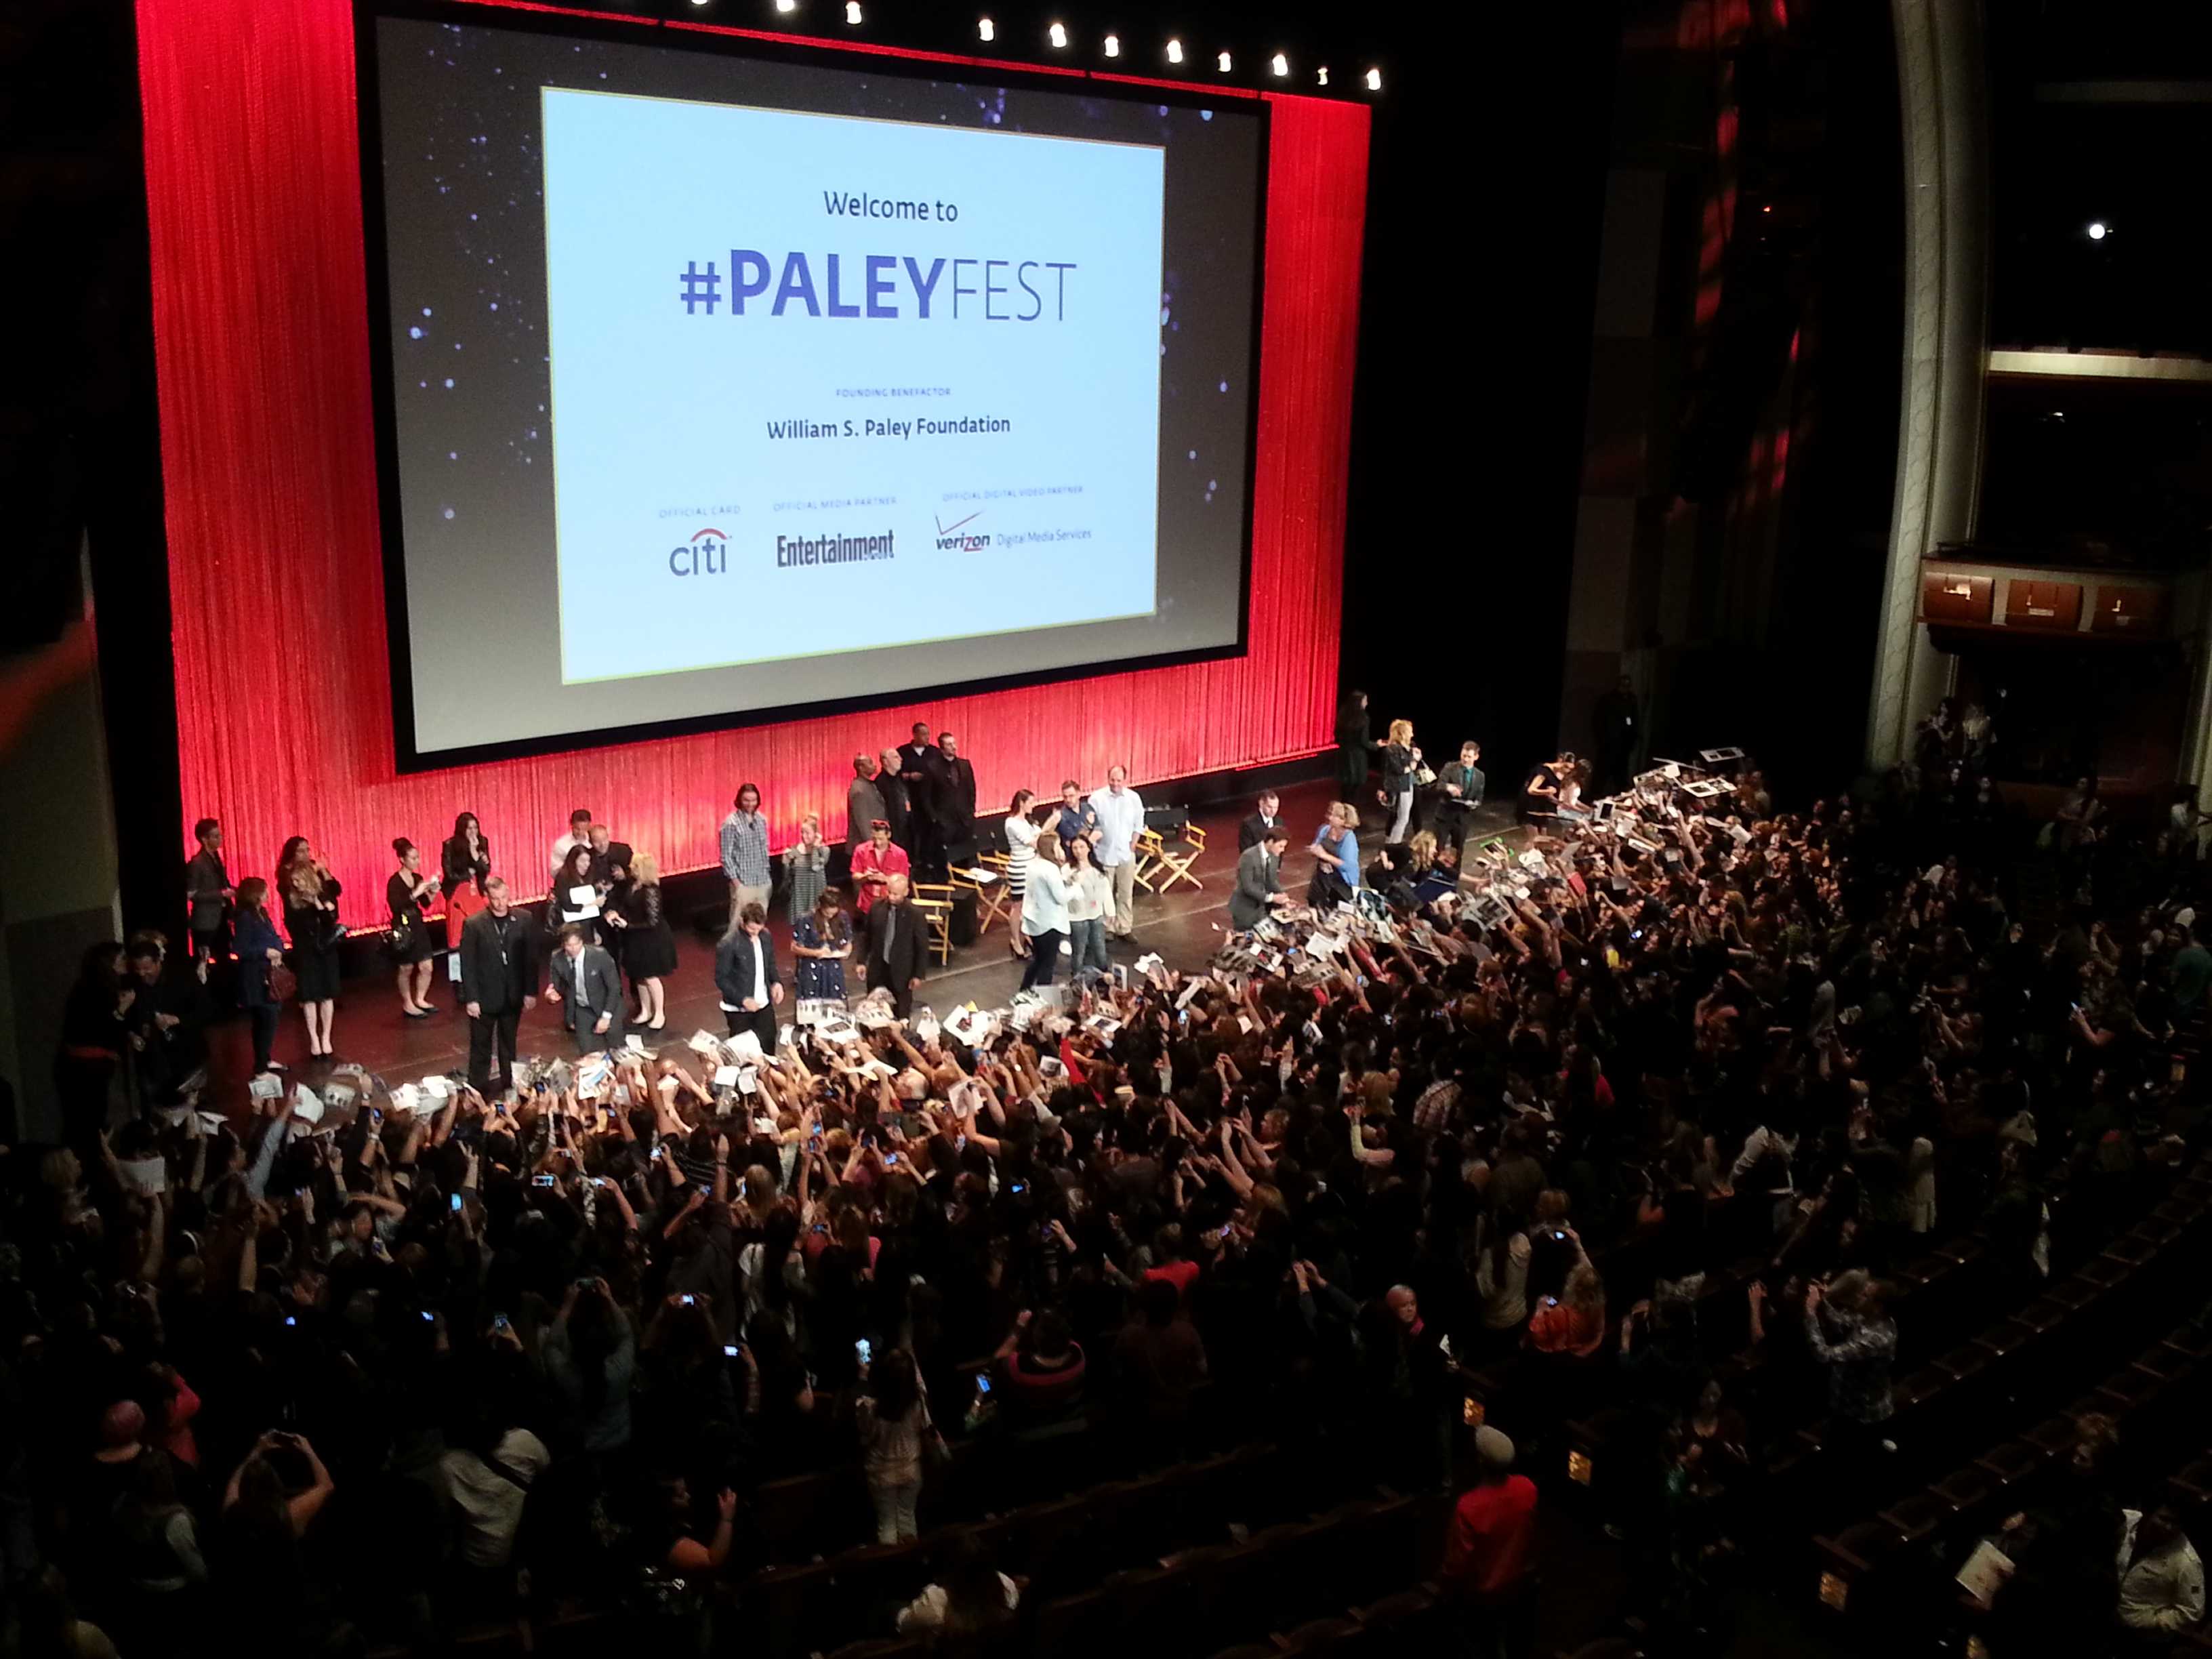 Fans scream for cast members of The Vampire Diaries to sign autographs for them at PaleyFest 2014 Saturday night at the Dolby Theatre. Photo by Gabriela Rodriguez, Daily Sundial